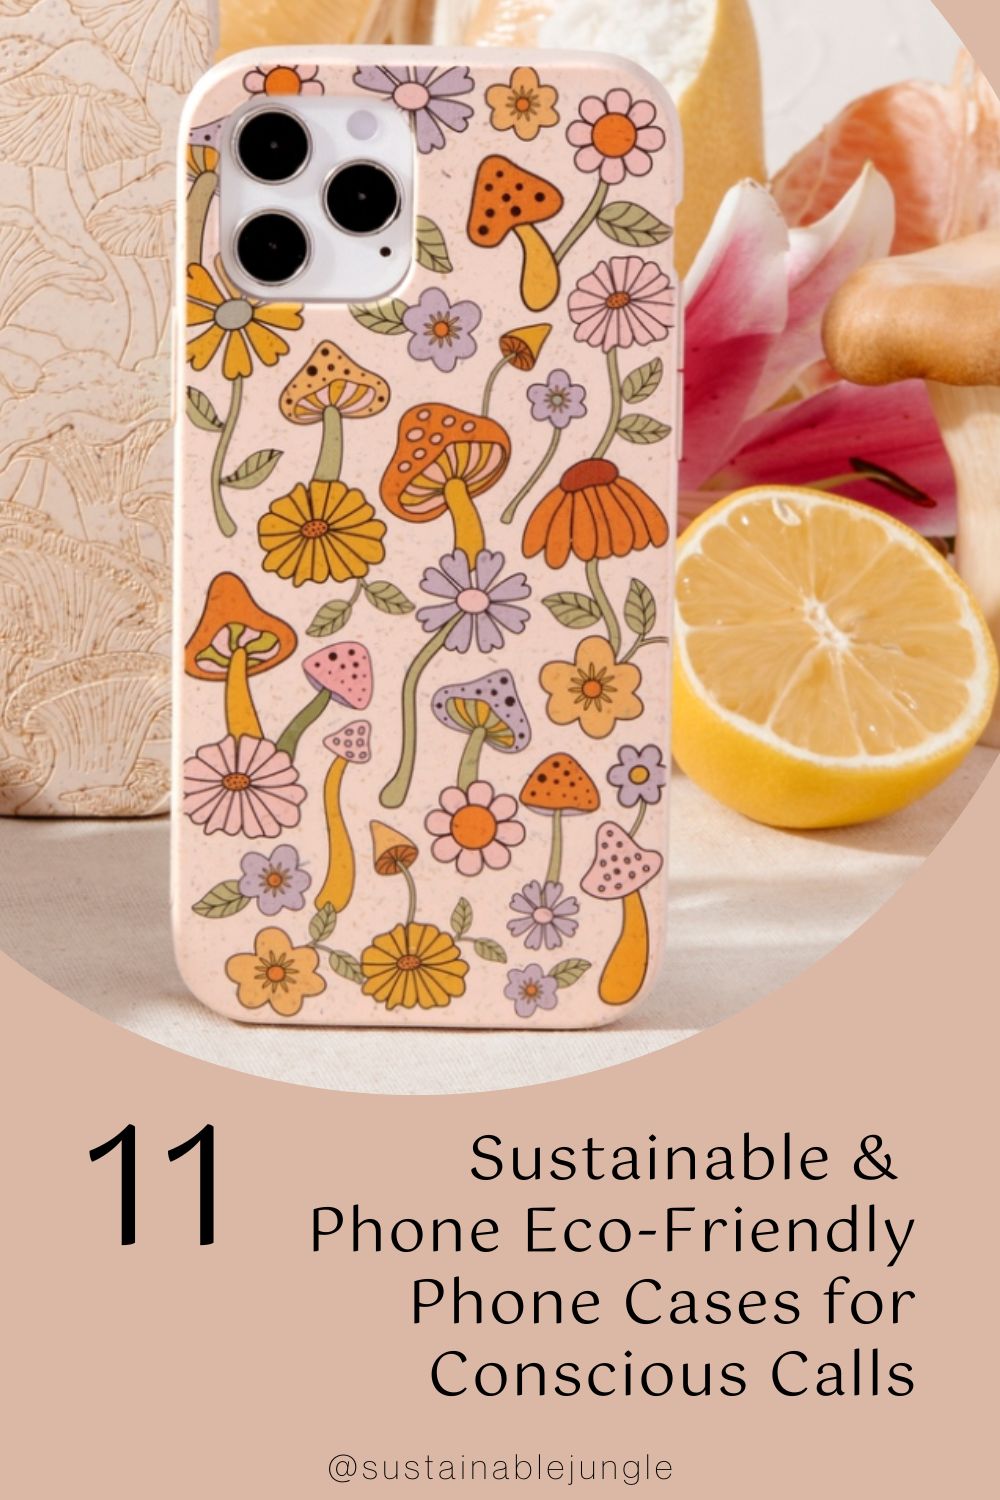 11 Sustainable & Eco-Friendly Phone Cases for Conscious Calls Image by Pela Case #ecofriendlyphonecases #sustainablephonecases #ecofriendlyiphonecases #ecofriendlycellphonecases #bestsustainablephonecases #sustainablephonecasebrands #sustainablejungle